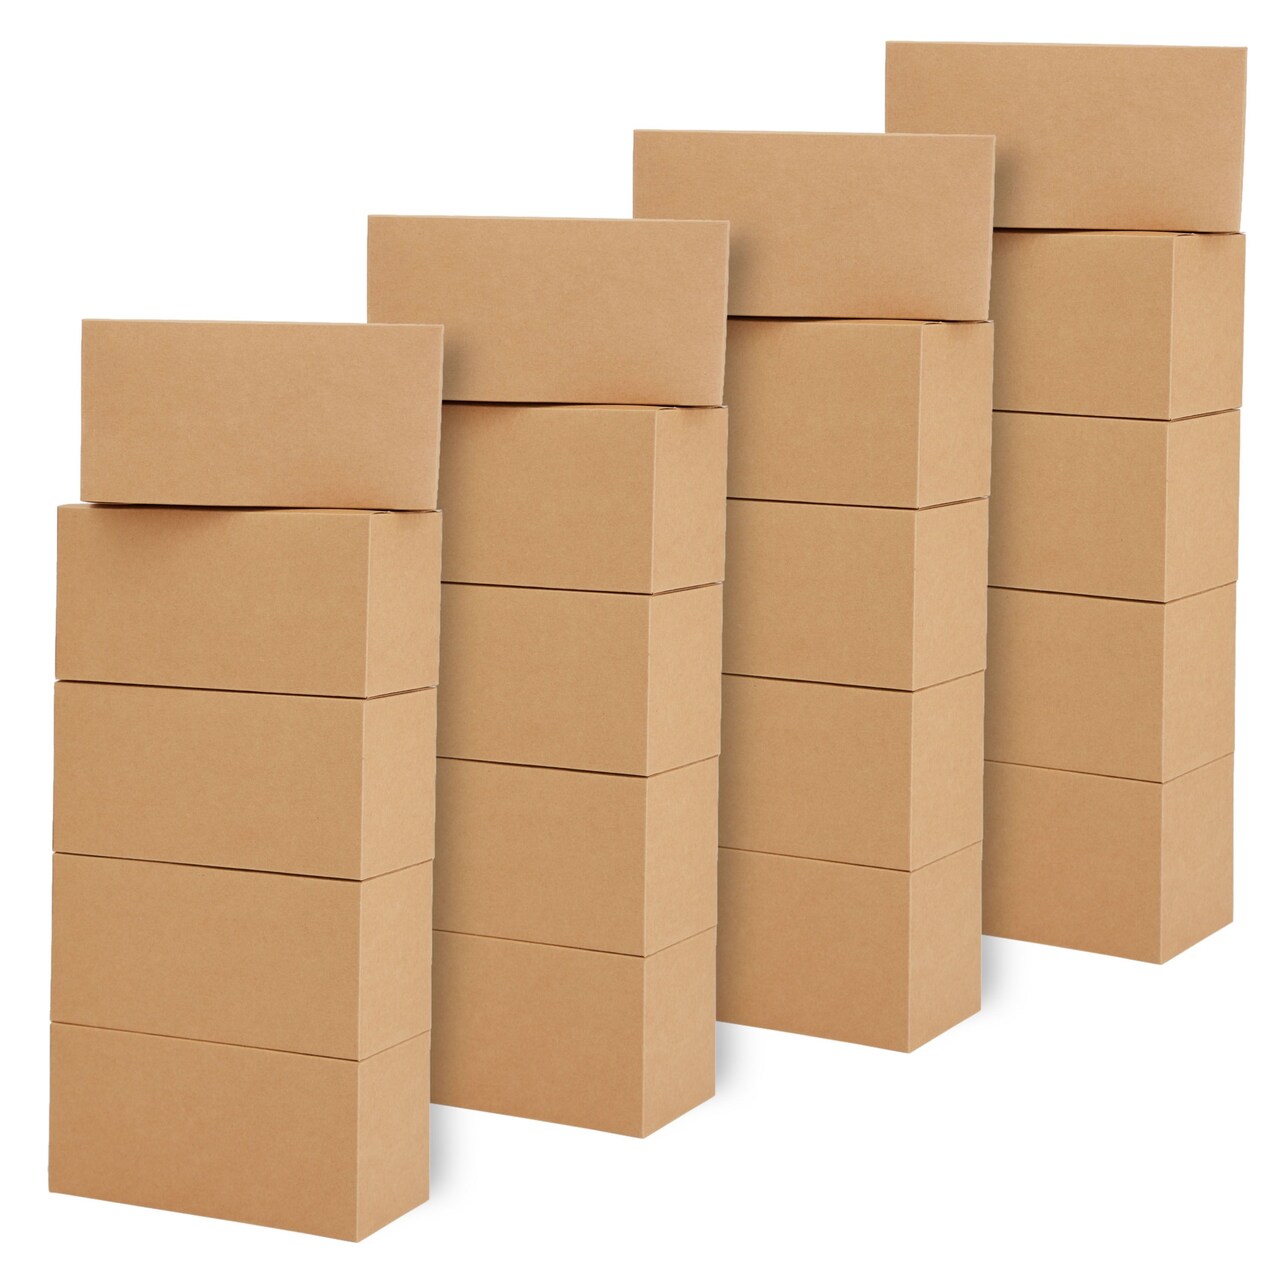 20 Pack 9 x 4.5 x 4.5 Inch Brown Gift Boxes with Lids, Brown Paper Tumbler Box for Present Wrapping, Shipping, Party Favors, Business Supplies, Easy to Assemble